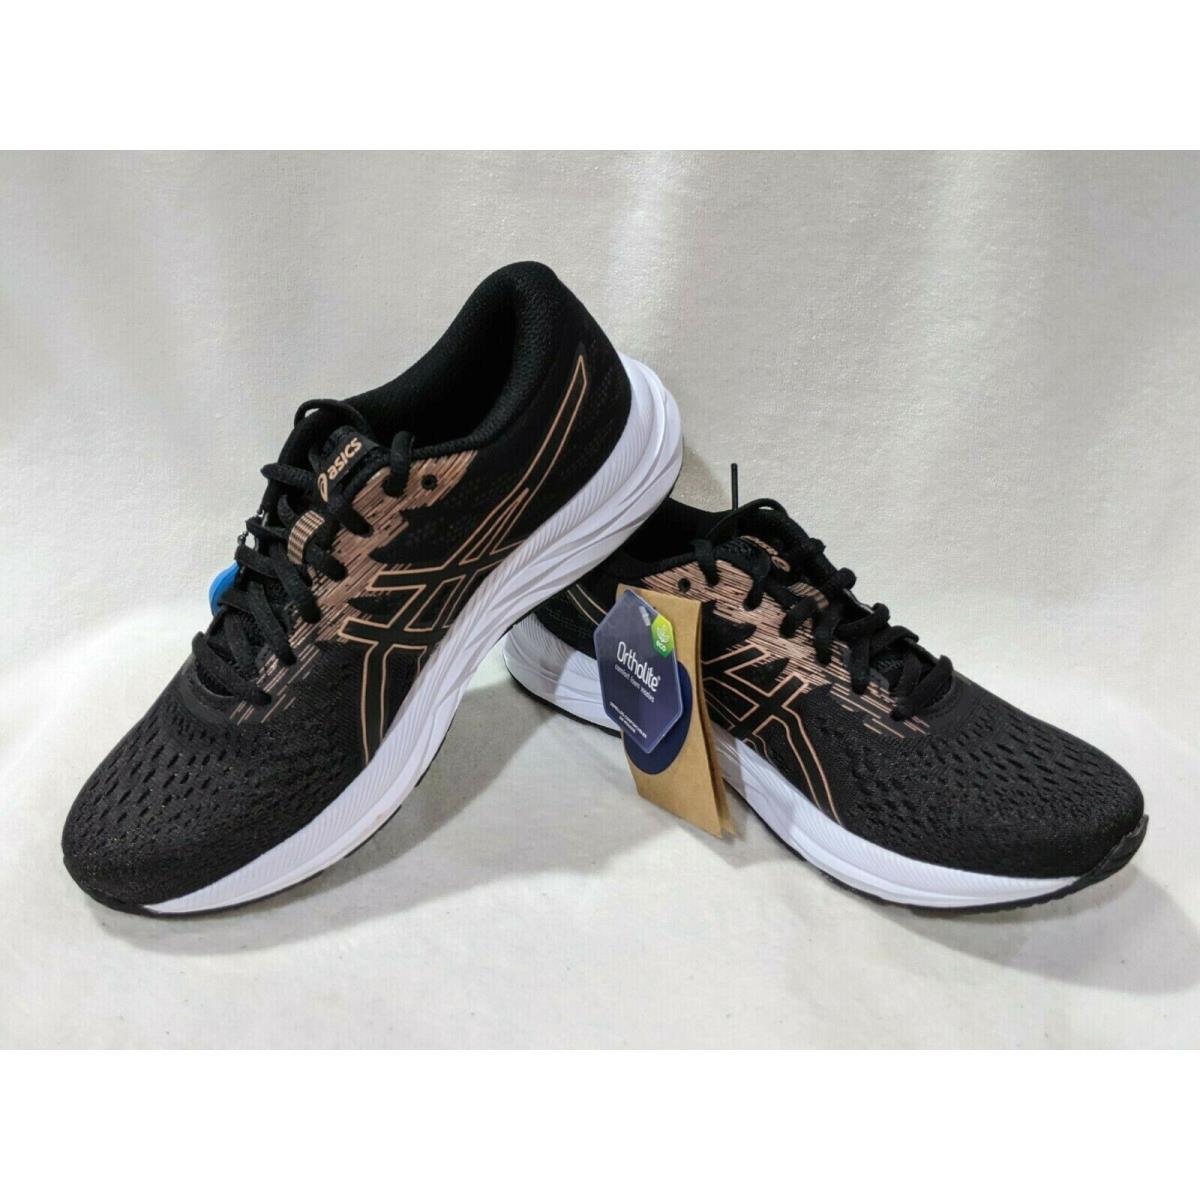 Asics Women`s Gel-excite 7 Black/rose Gold Running Shoes - Size 6.5 Wide D